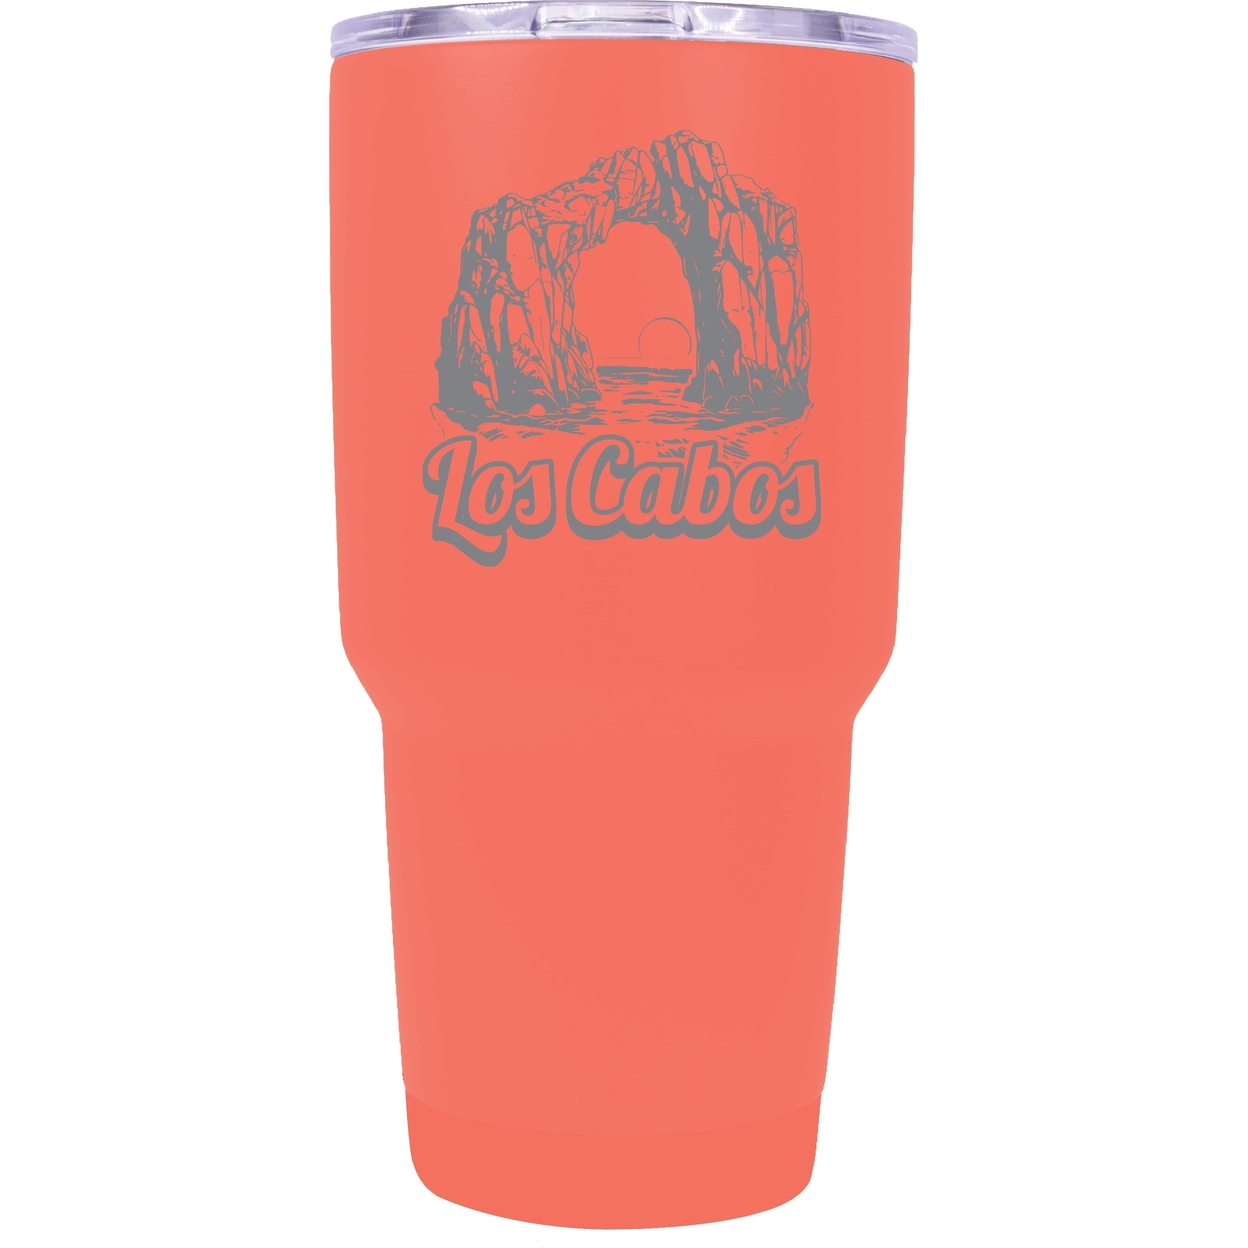 Los Cabos Mexico Souvenir 24 Oz Engraved Insulated Stainless Steel Tumbler - Coral,,Single Unit